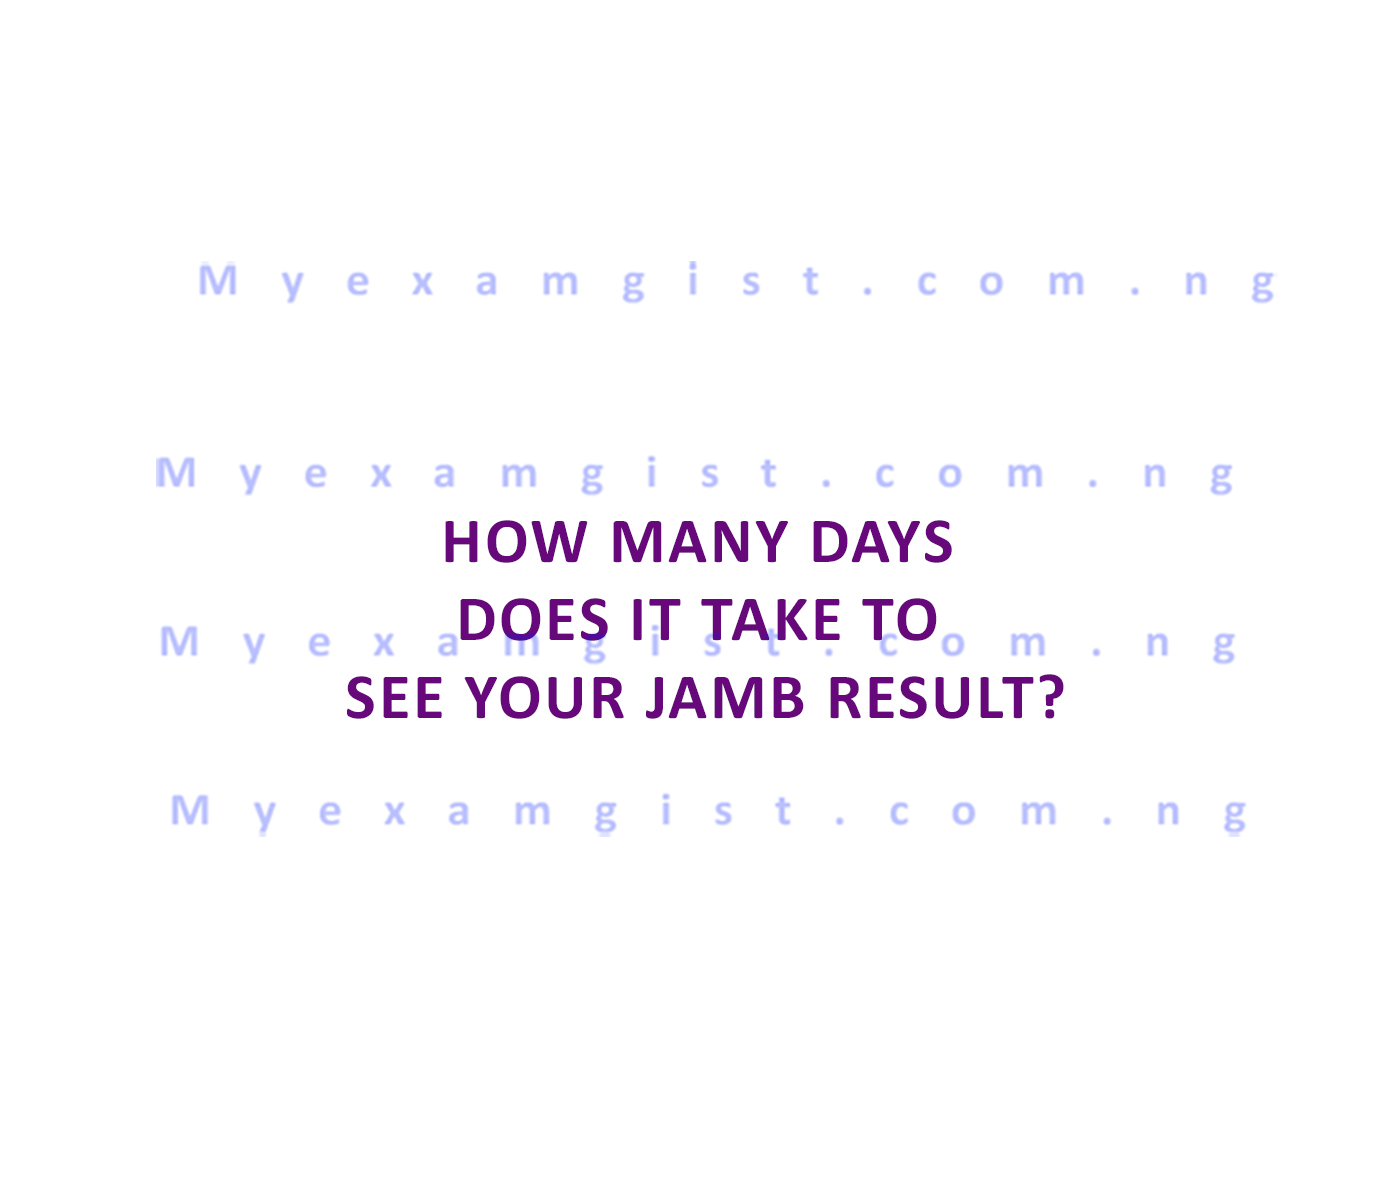 How many days does it take to see your JAMB result?